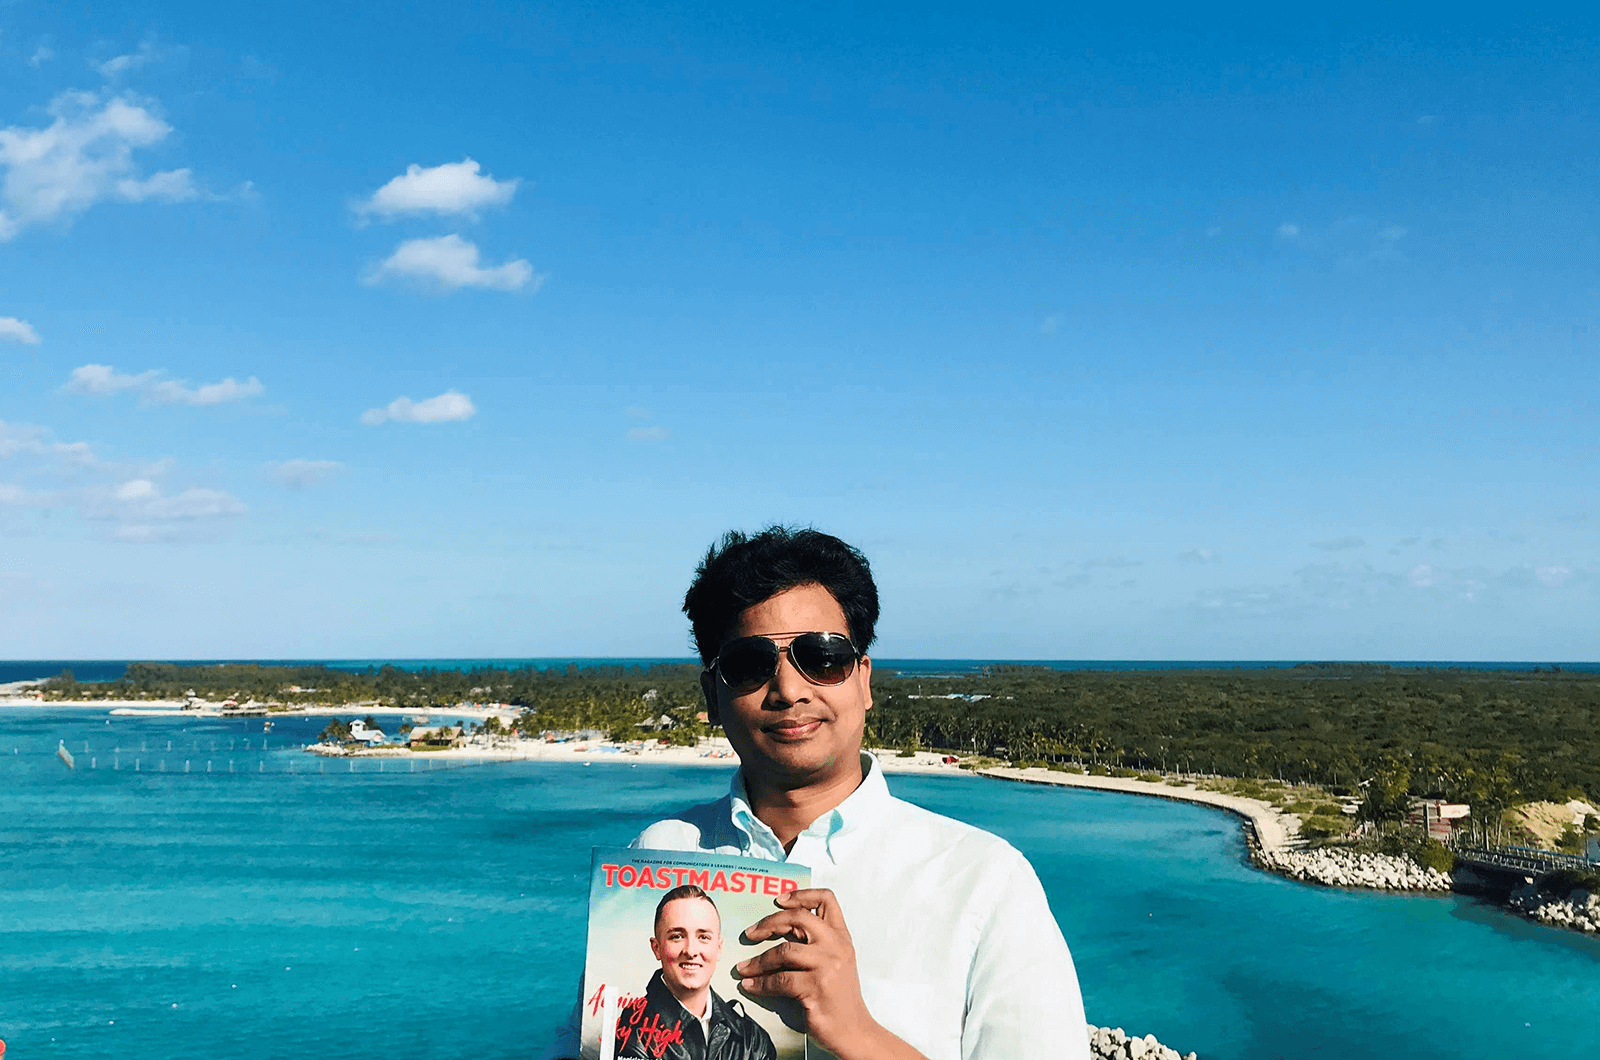 Raju Brahmandhabheri of Novi, Michigan, U.S., vacations in Castaway Cay, an exclusive port for ships with the Disney Curise Line in the Bahamas.